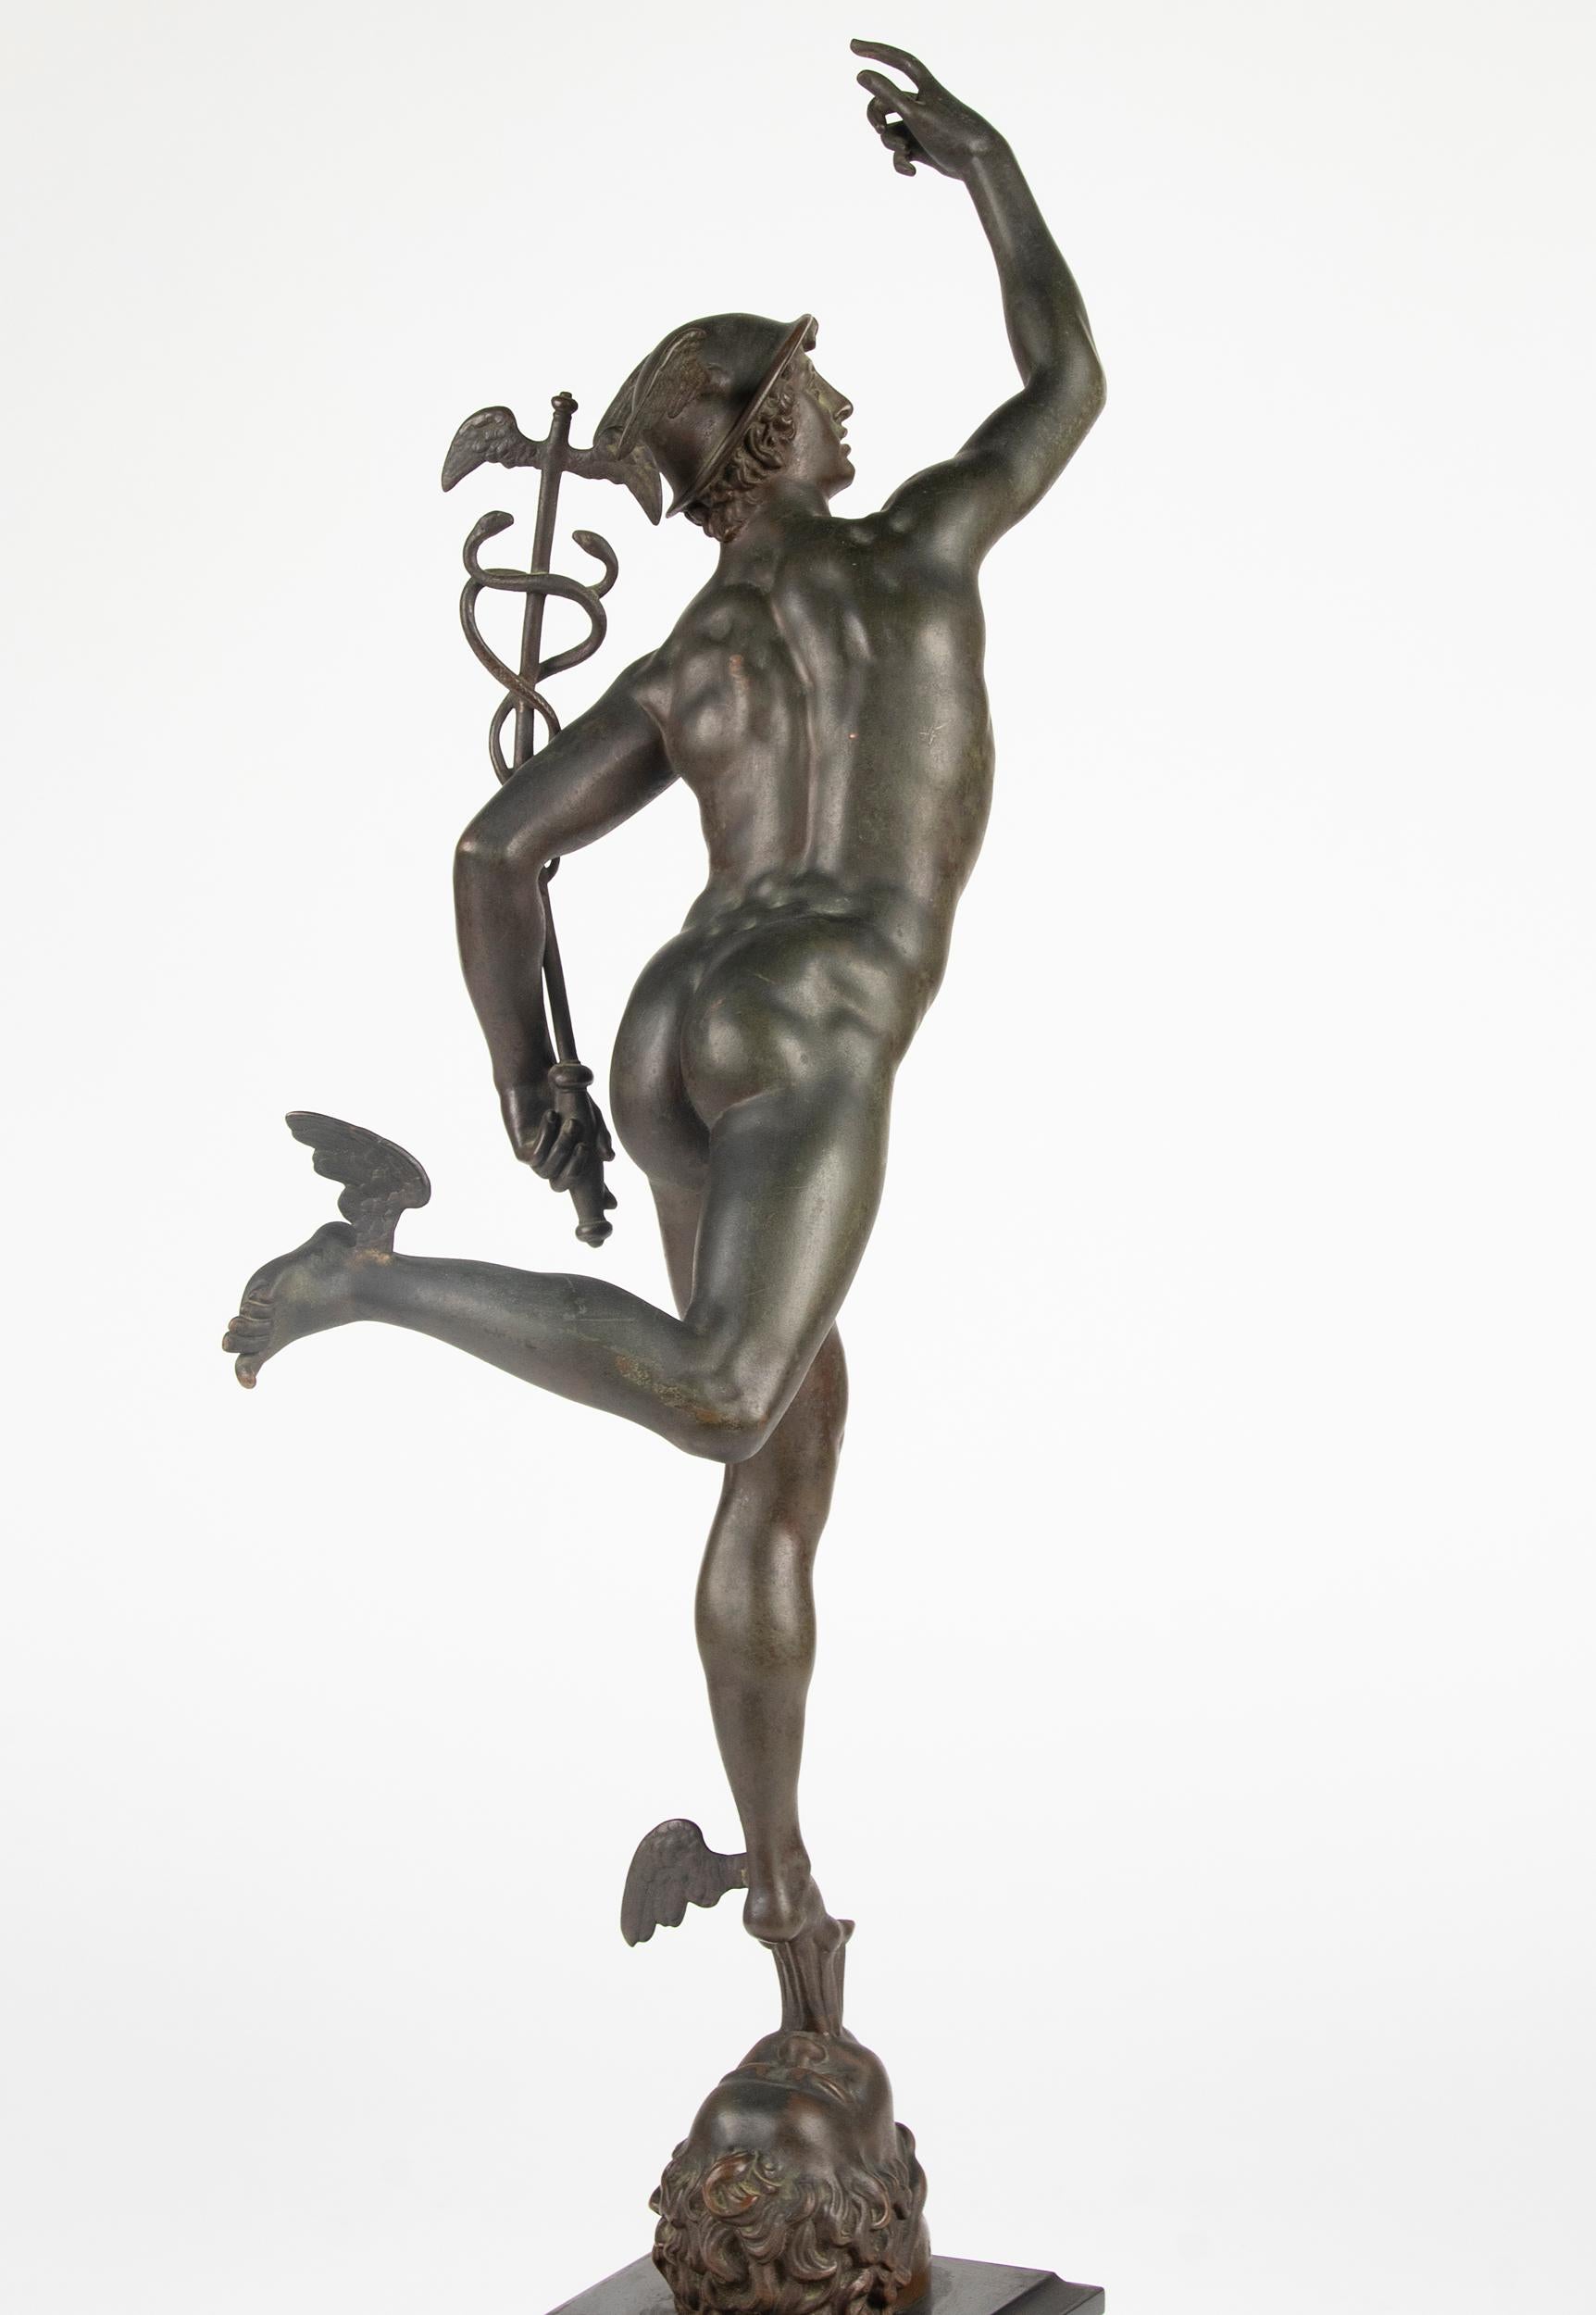 French 19th Century Bronze Statue of Mercury / Hermes by Ferdinand Barbedienne